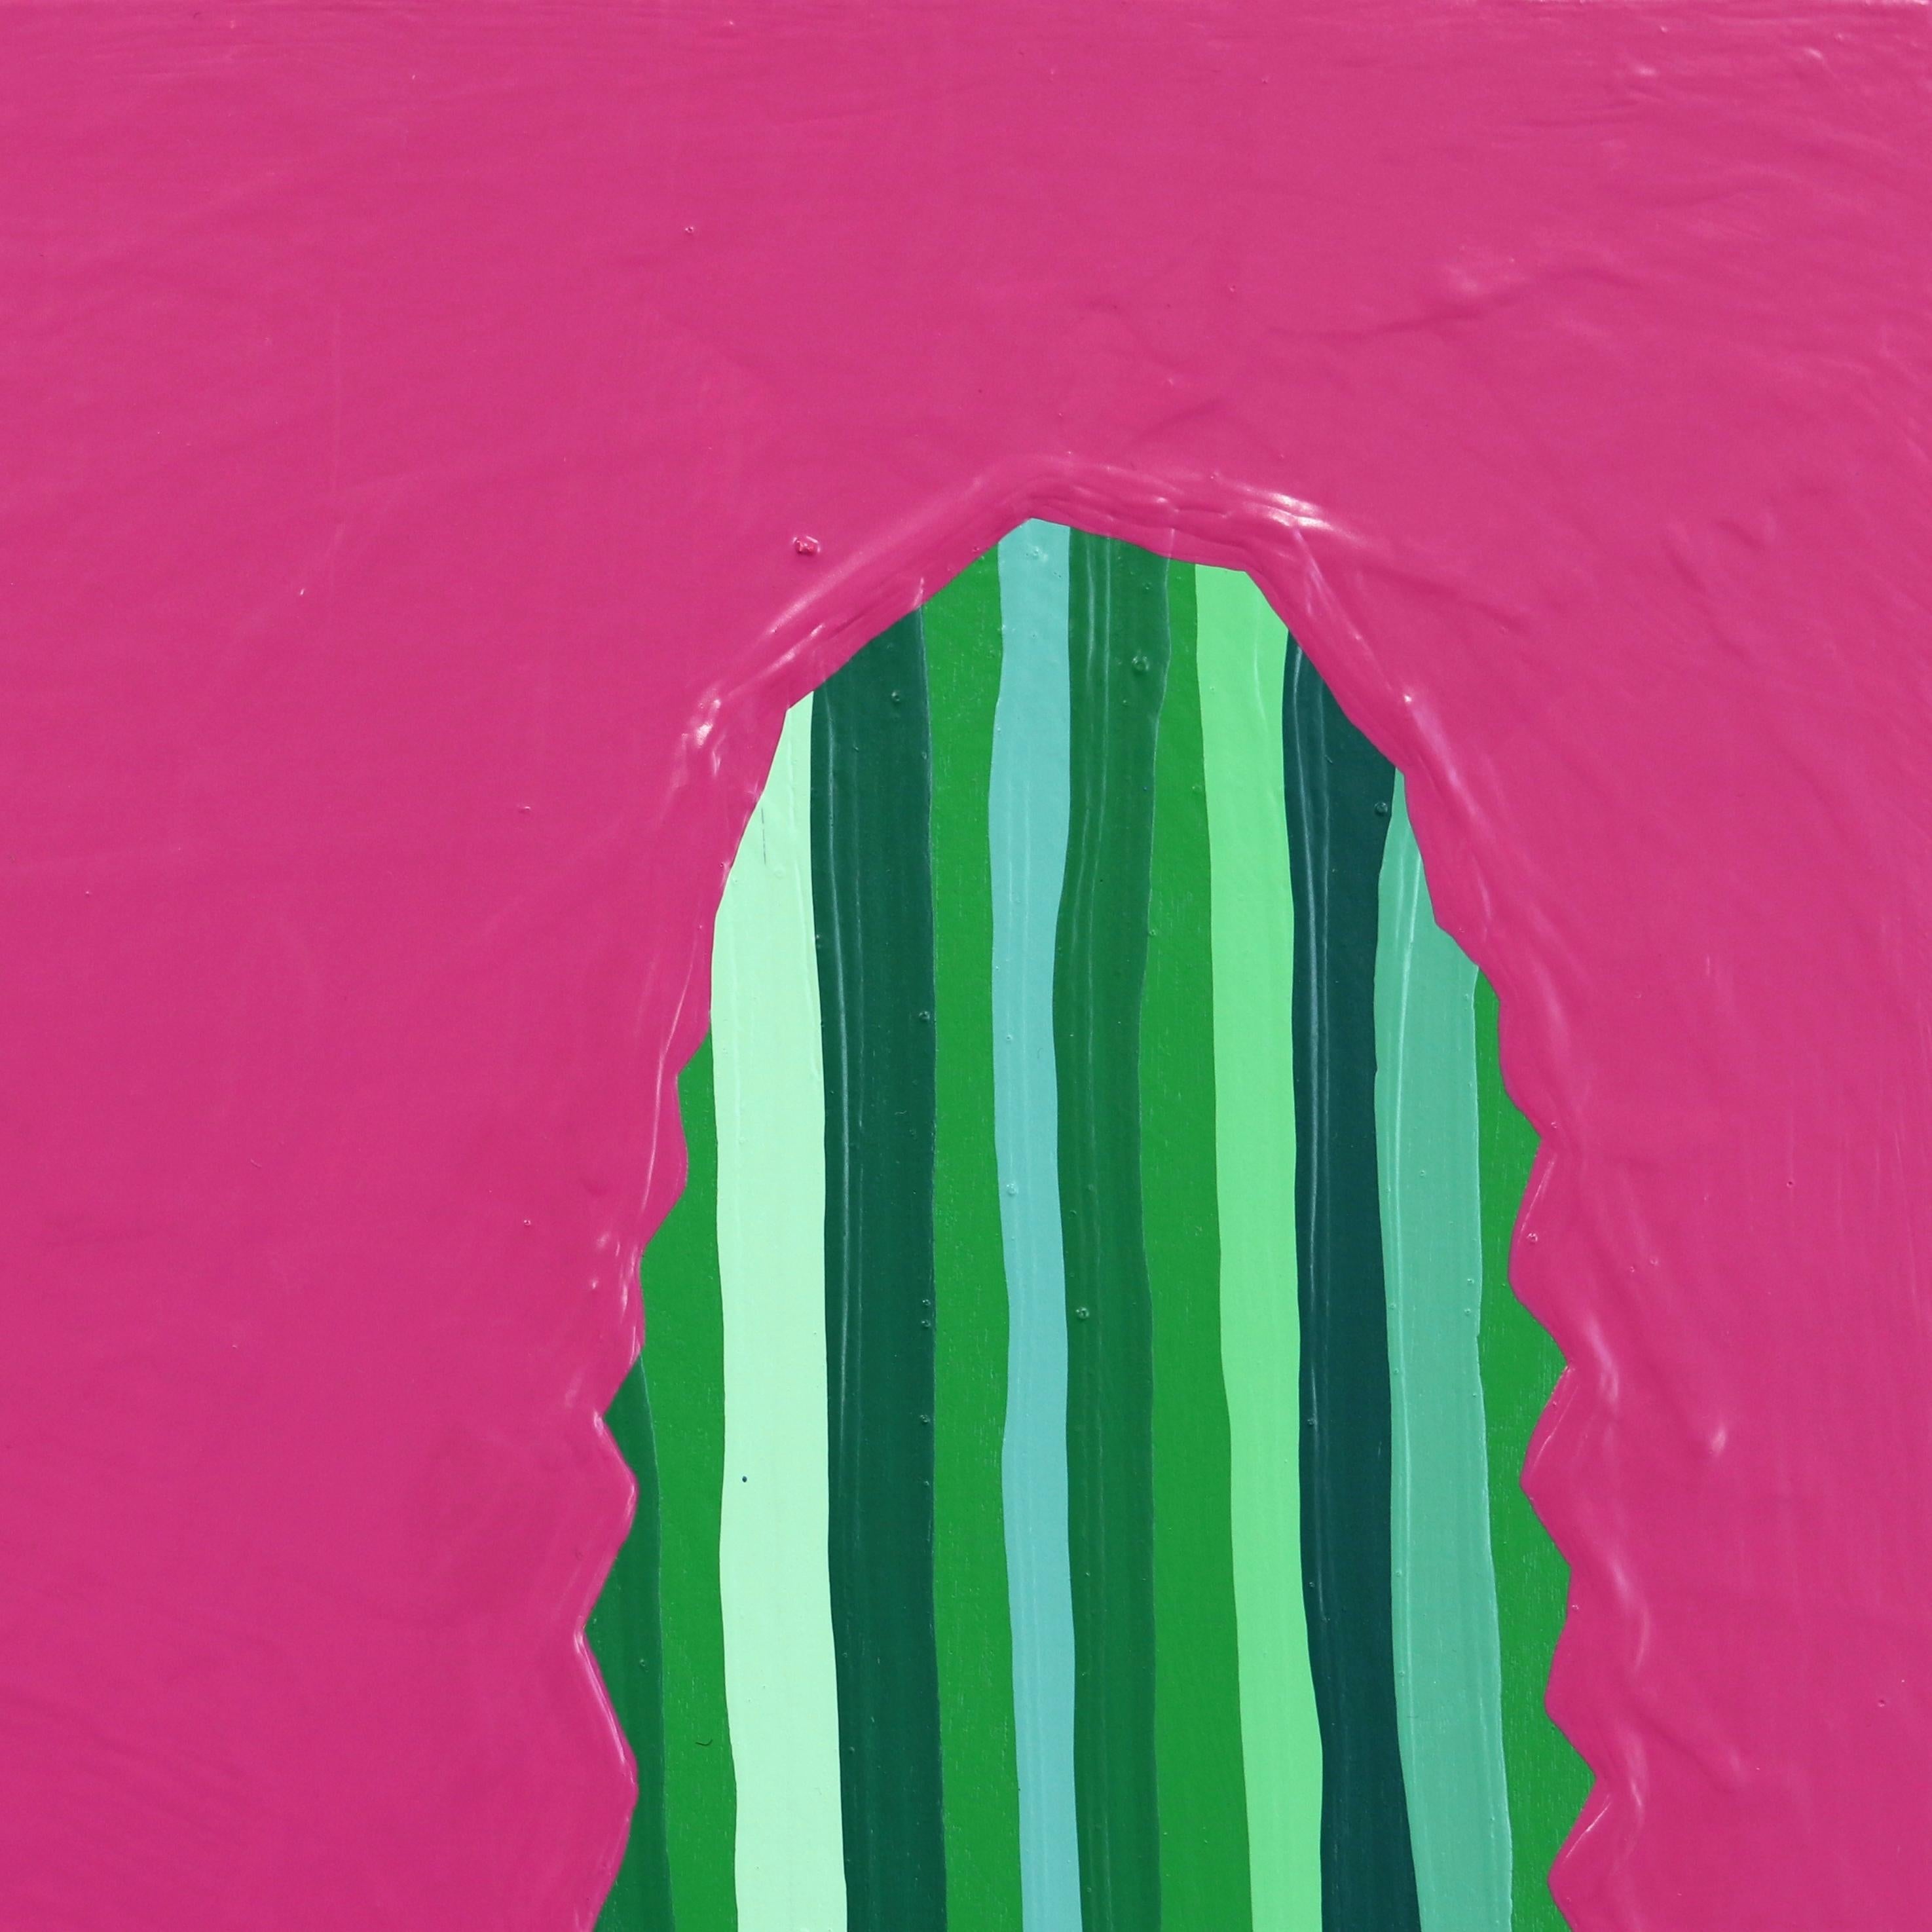 Rosa Picante - Vibrant Pink Green Southwest Inspired Pop Art Cactus Painting For Sale 1